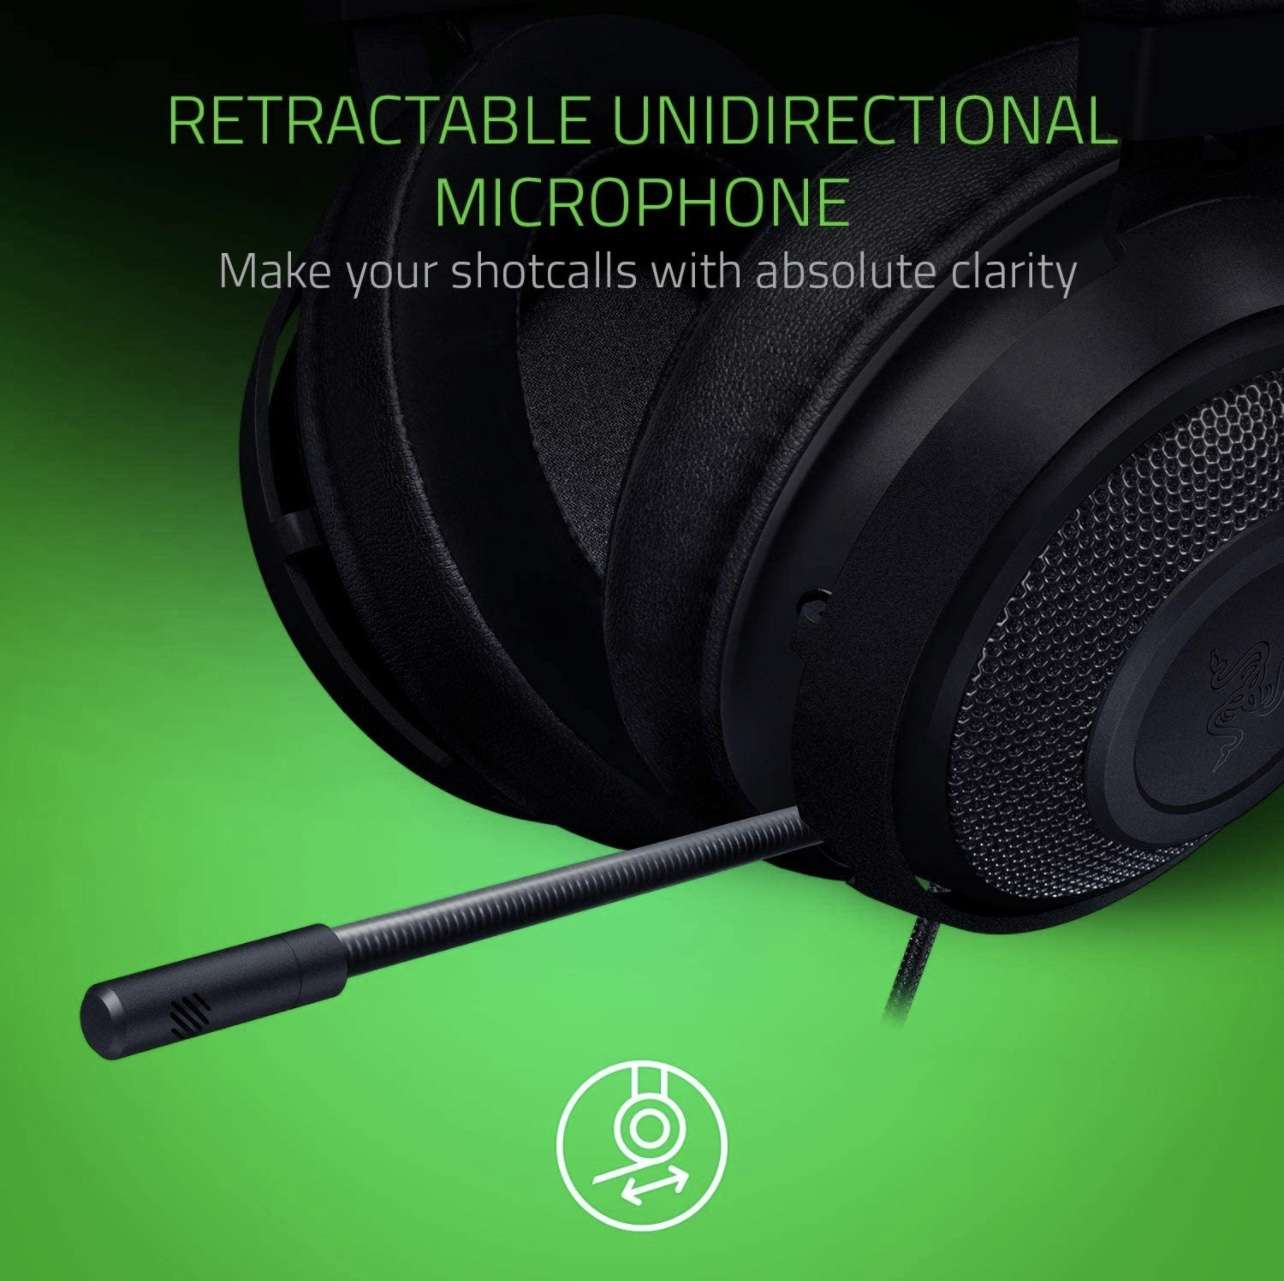  Razer Barracuda X Wireless Multi-Platform Gaming and Mobile  Headset (2021 Model): 250g Ergonomic Design - Detachable HyperClear Mic -  20 Hr Battery - Compatible w/PC, PS5, Switch, & Android - Black : Video  Games